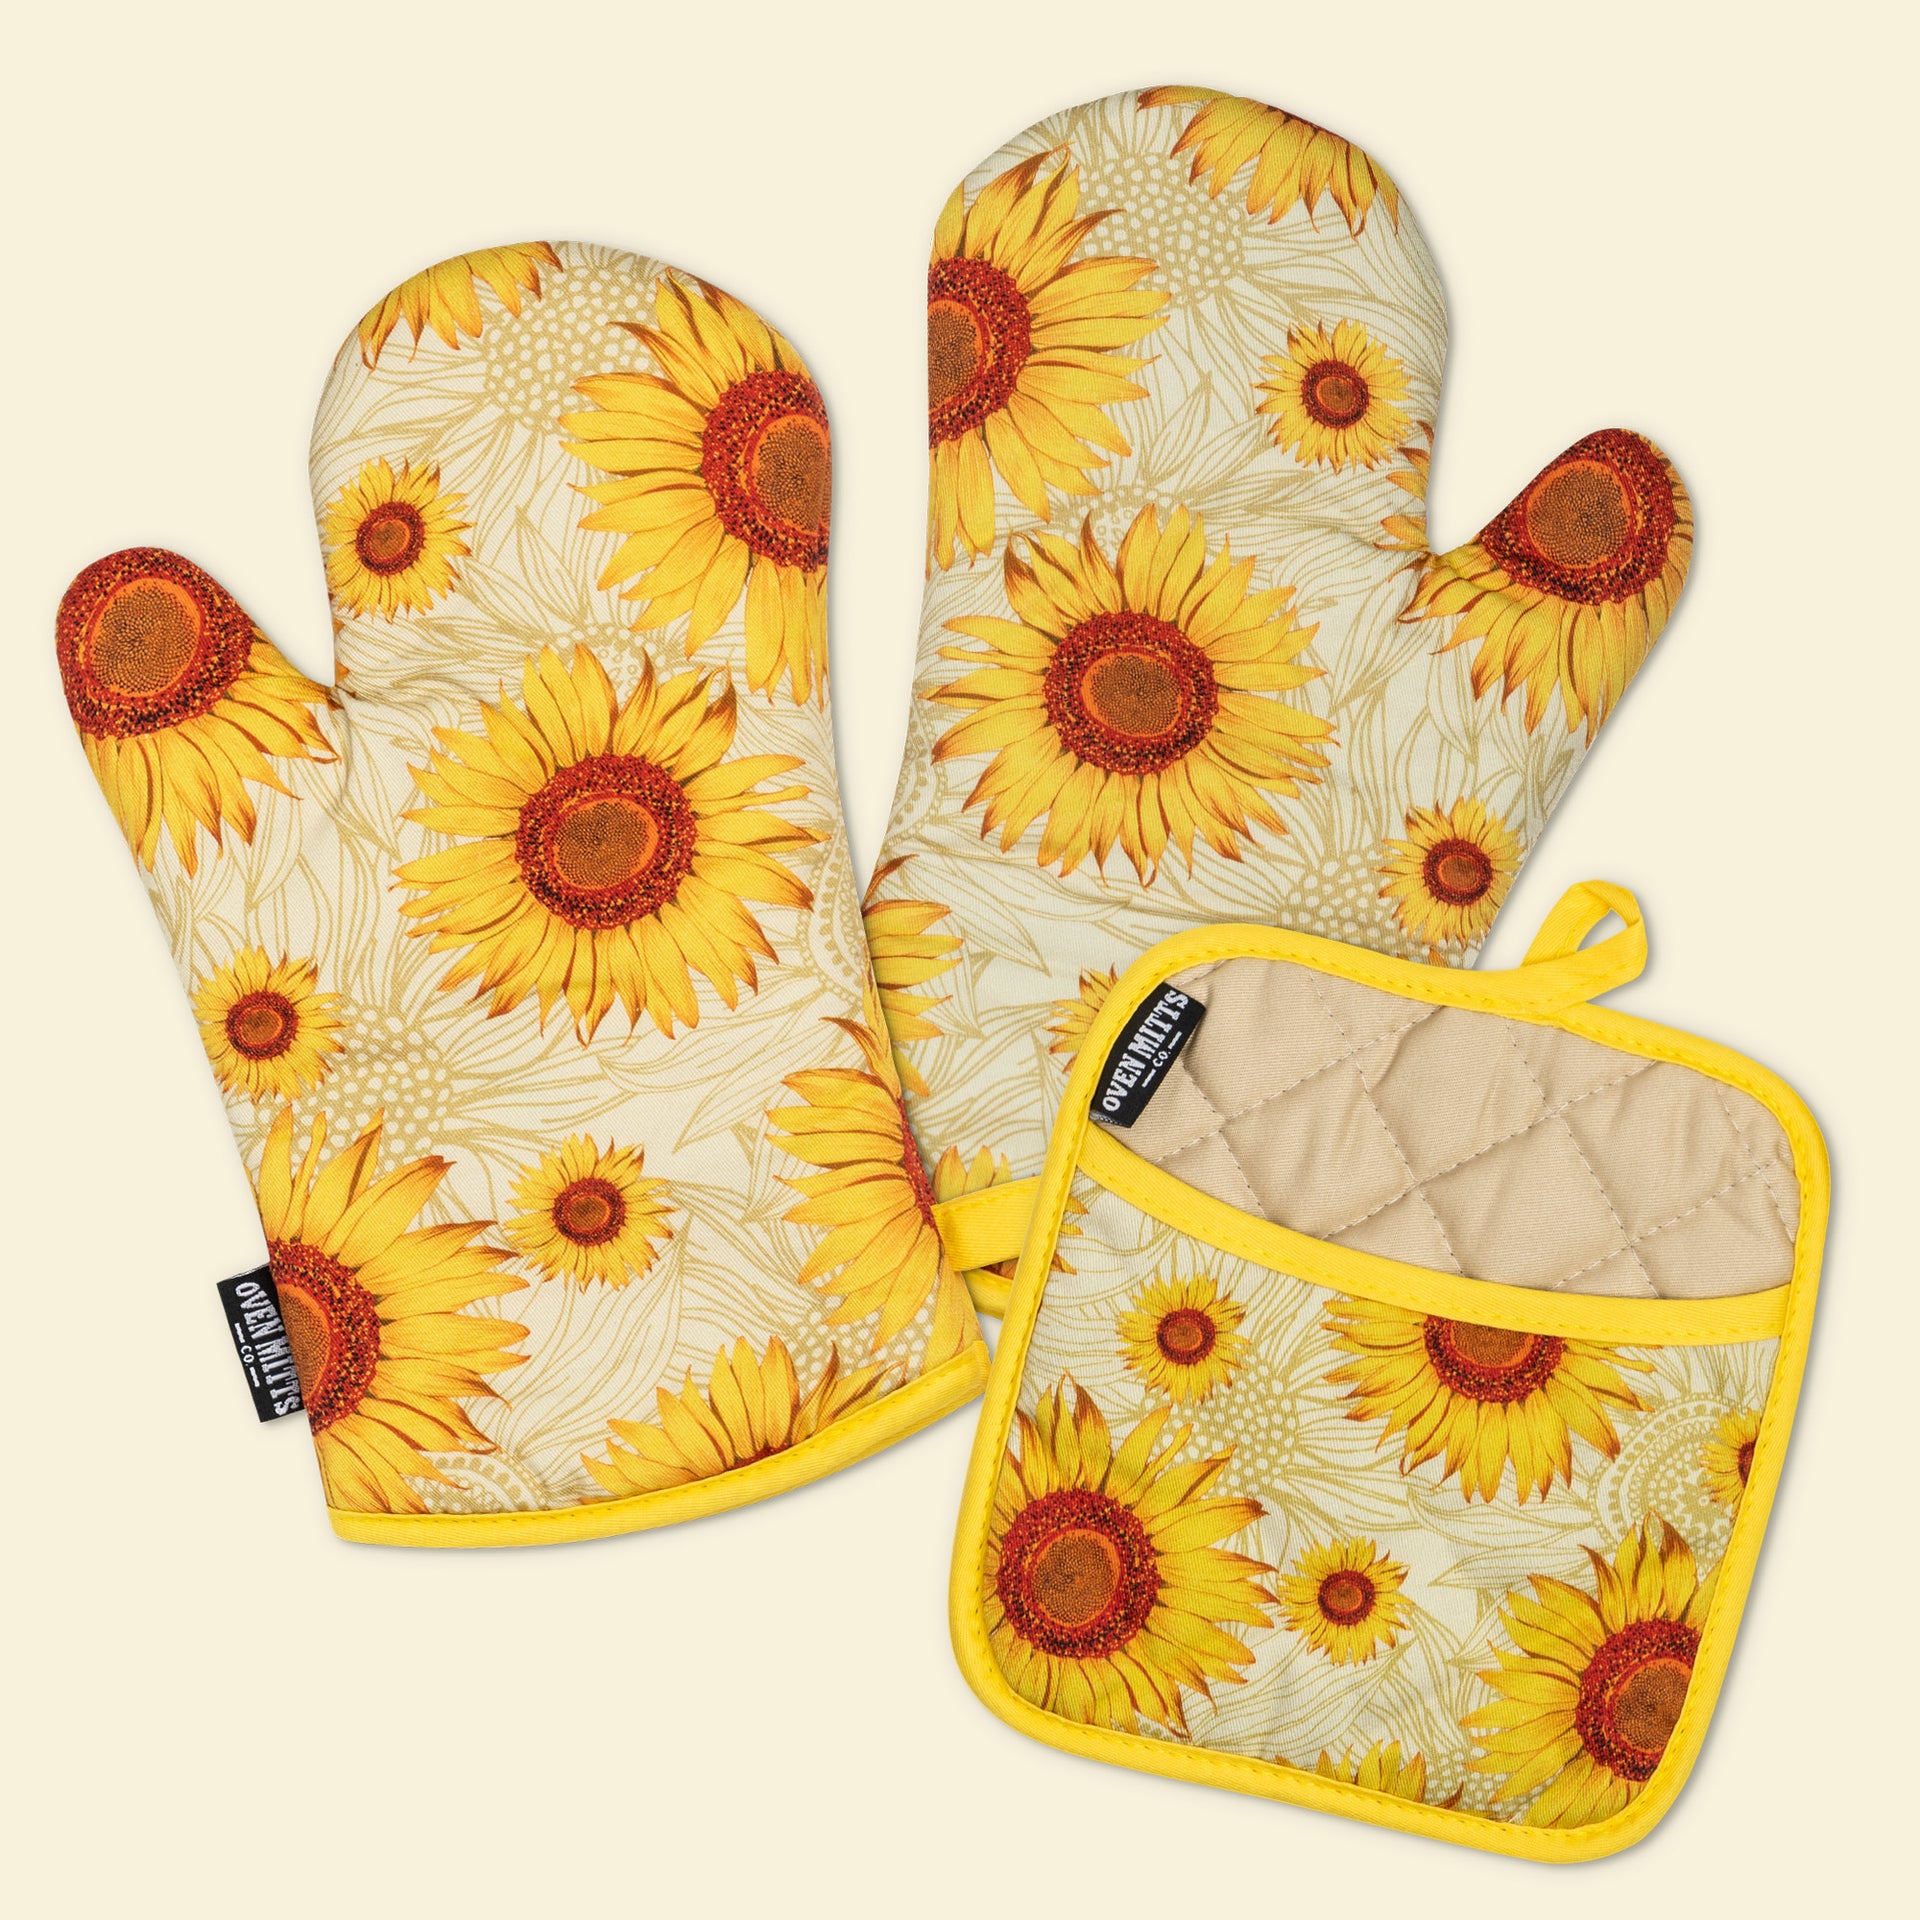 https://ovenmittsco.com/cdn/shop/files/Summer-Sunflowers-Oven-Mitts-and-Pad.jpg?v=1697539485&width=1920